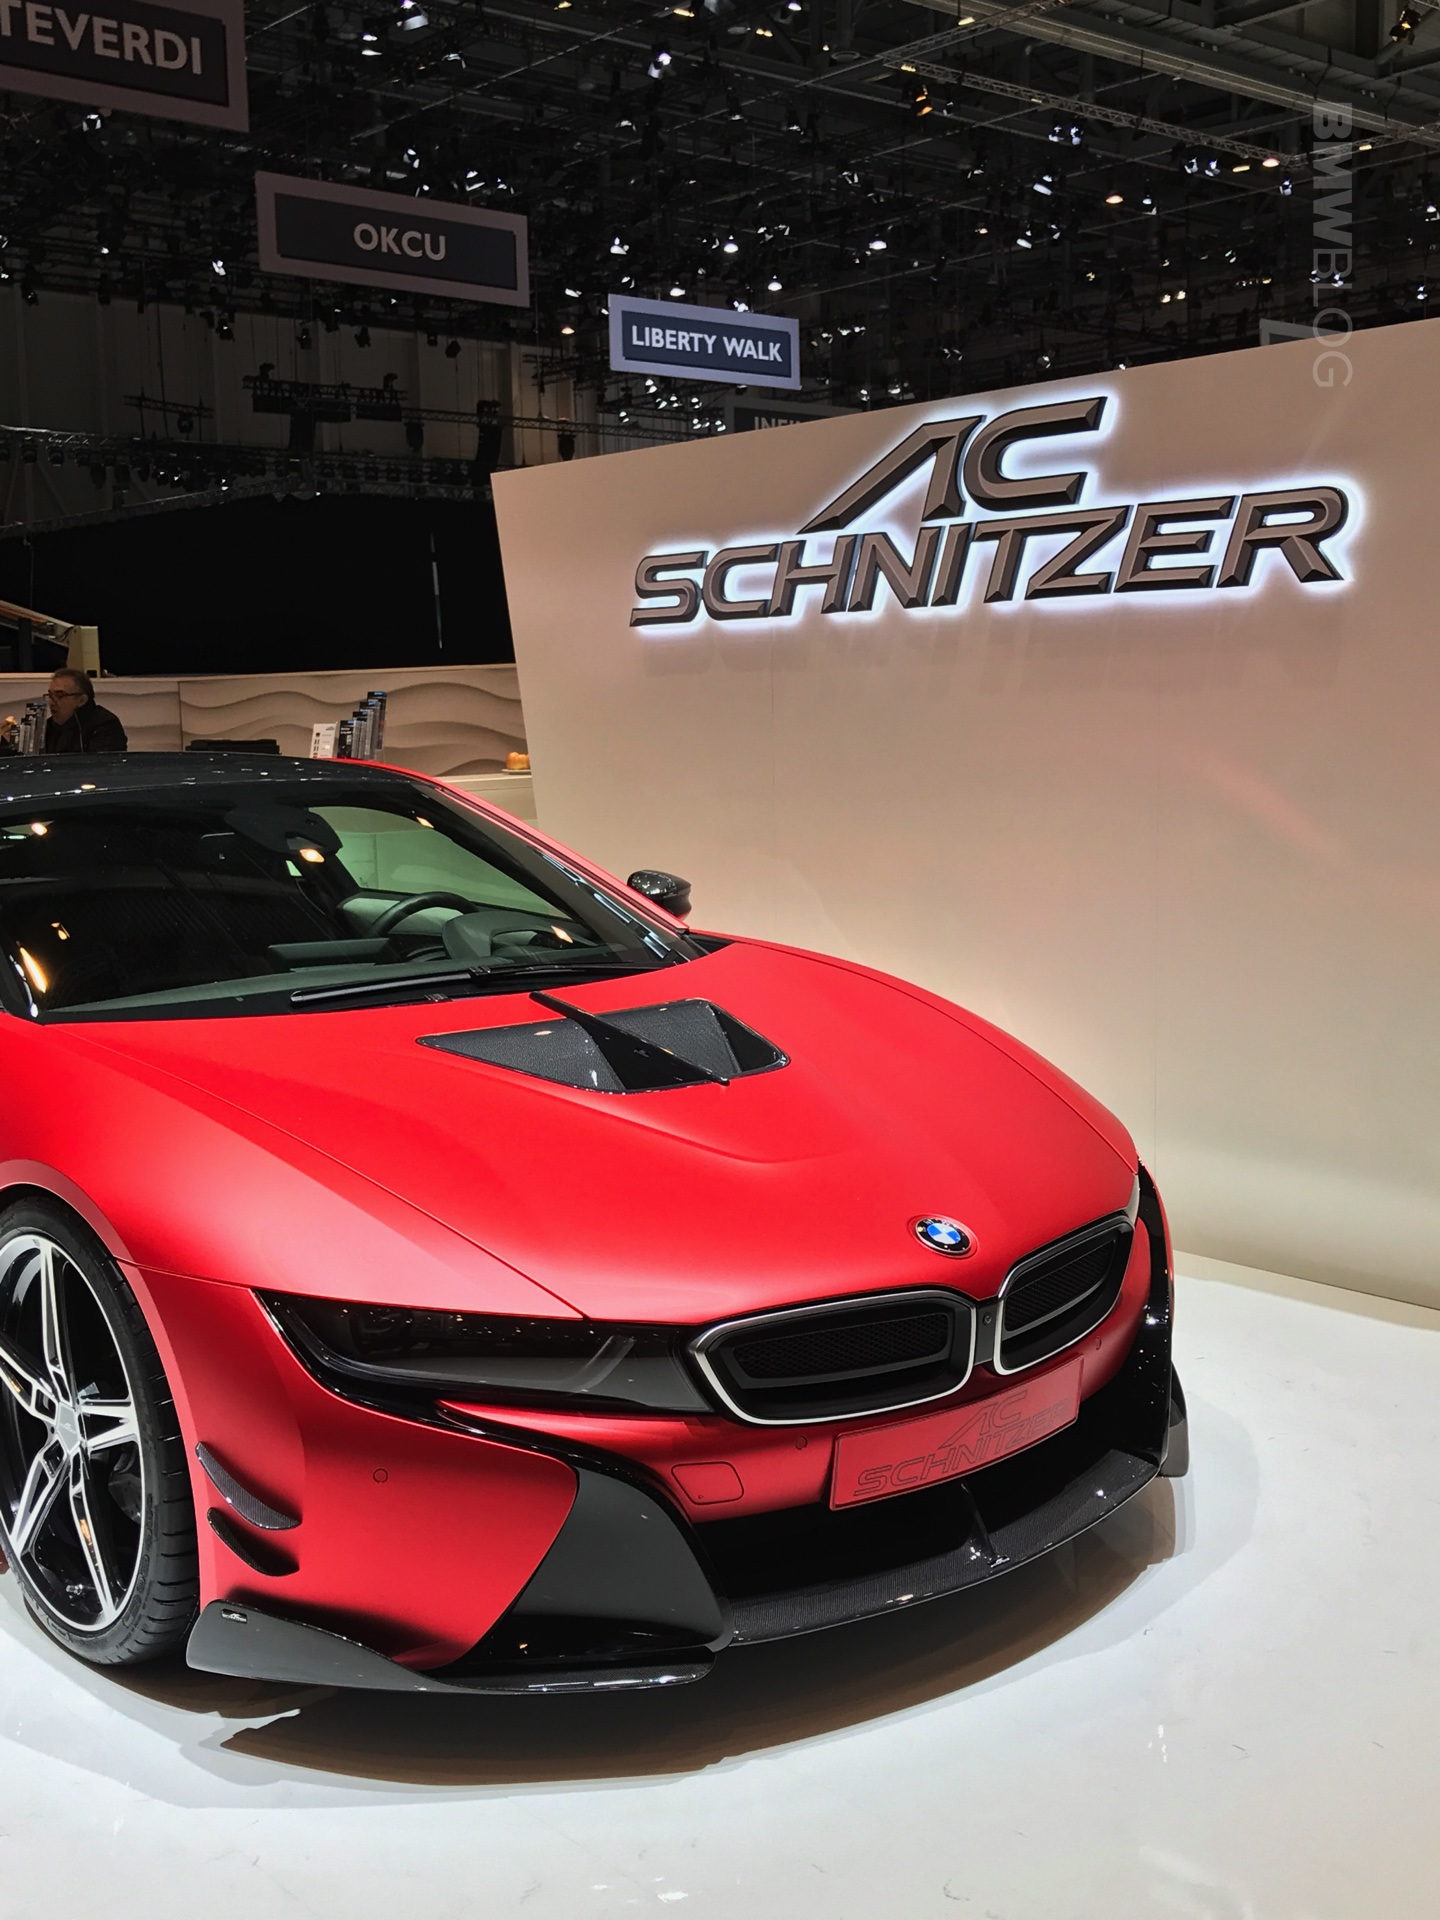 energy launch discretion AC Schnitzer brings the BMW i8 and M240i at the 2017 Geneva Motor Show